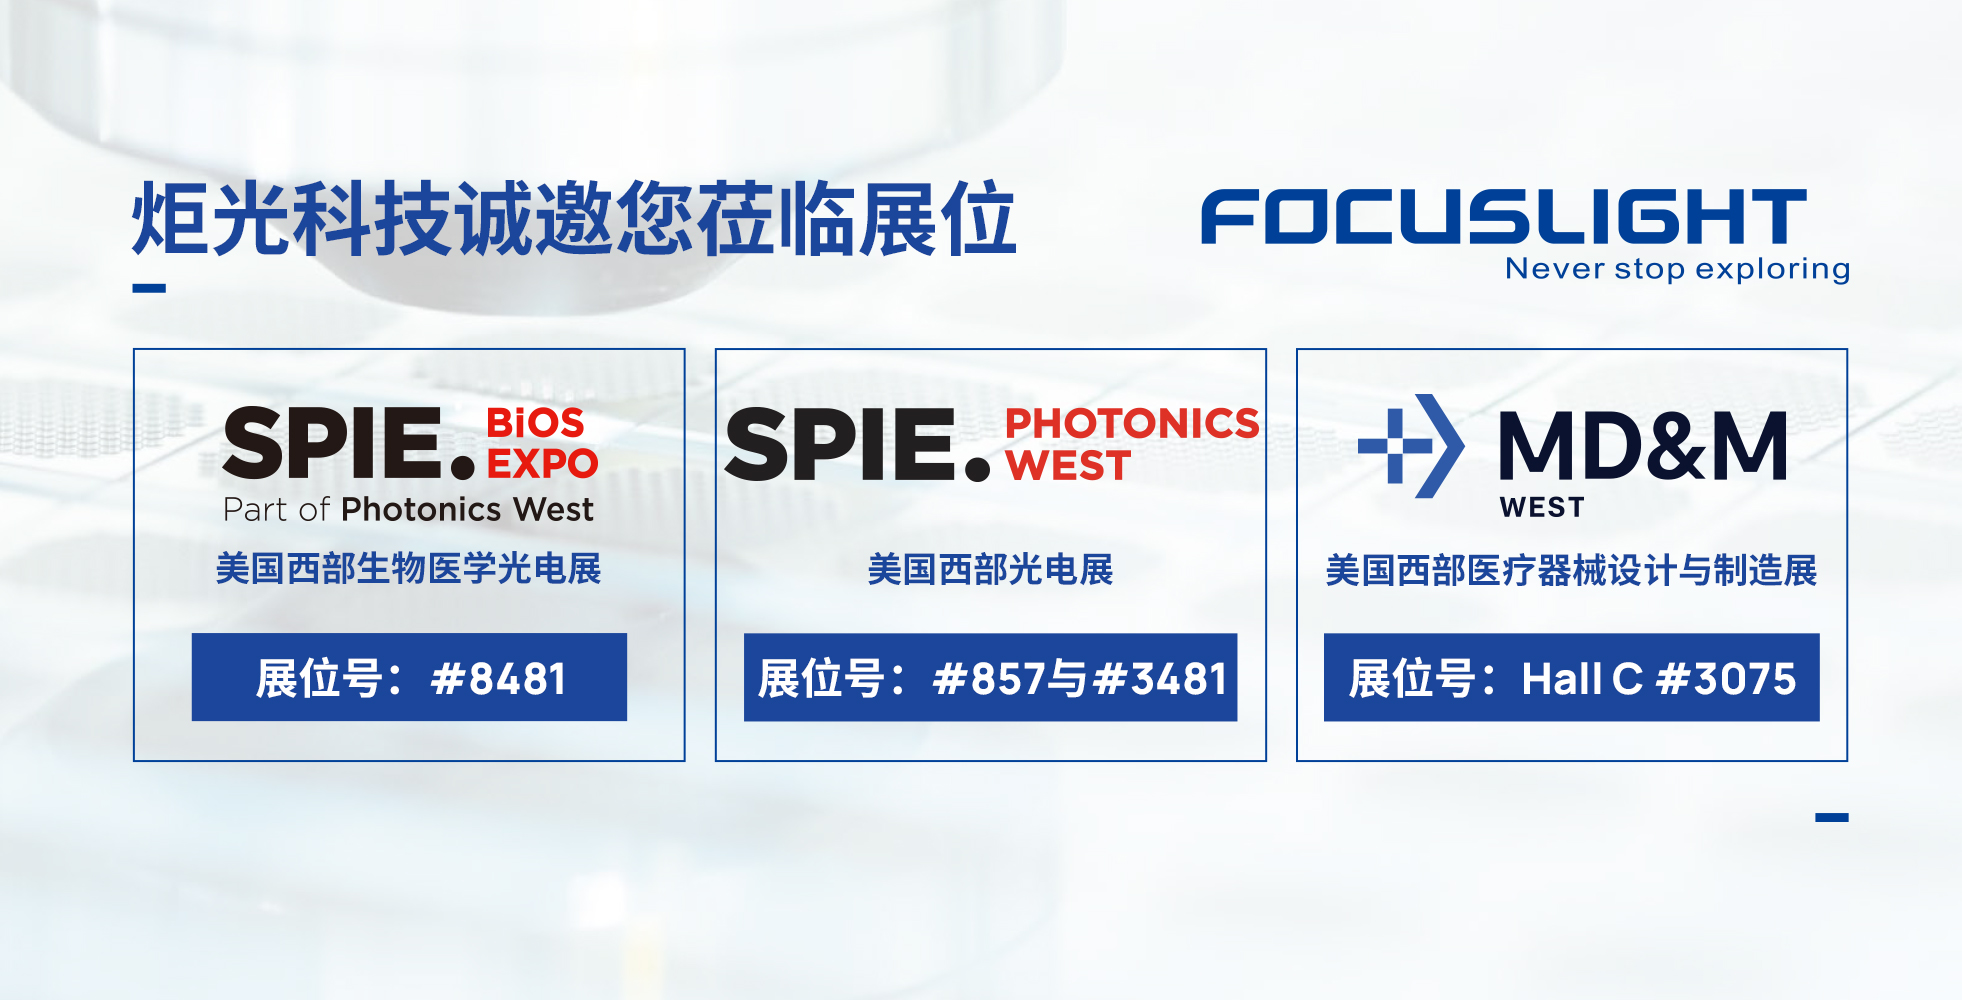 Focuslight Will Be Exhibiting at the SPIE BiOS Expo, SPIE Photonics West Exhibition, and MD&M West 2024